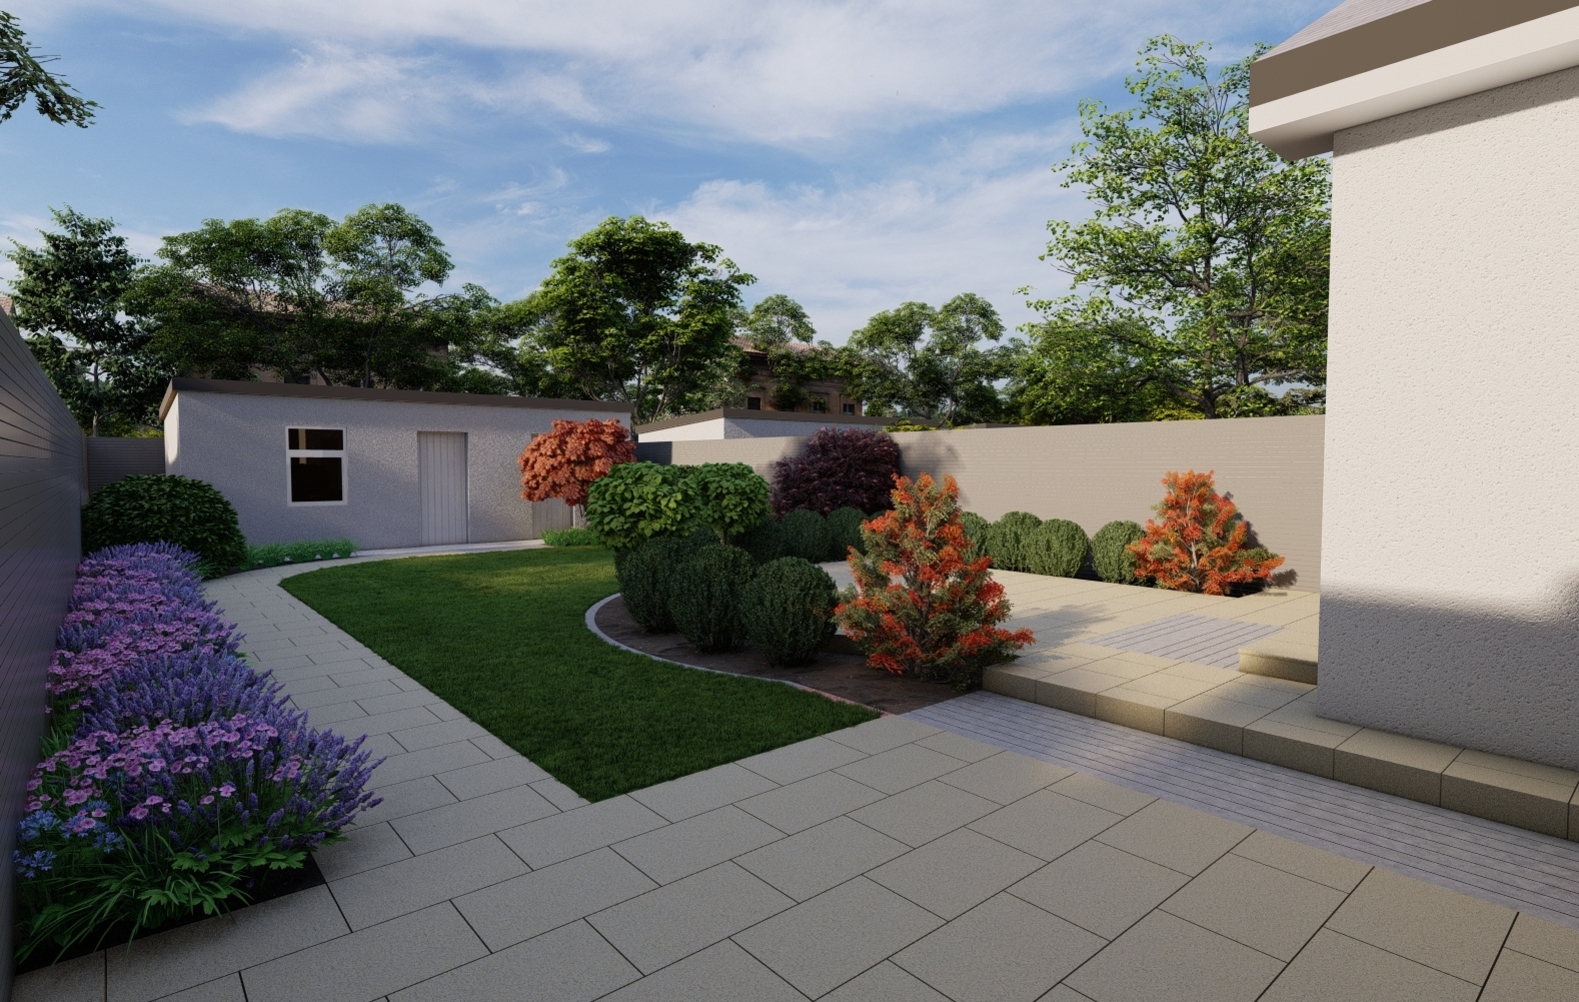 A Garden Design for a medium sized Family garden in Rathfarnham,  Dublin 14 features an expansive  Raised Patio with the emphasis on the provision of space for separate formal & casual dining areas with generously planted borders, custom made timber slatted fencing, Limestone paving, and large lawn area |   Owen Chubb Garden Design, Tel 087-2306 128